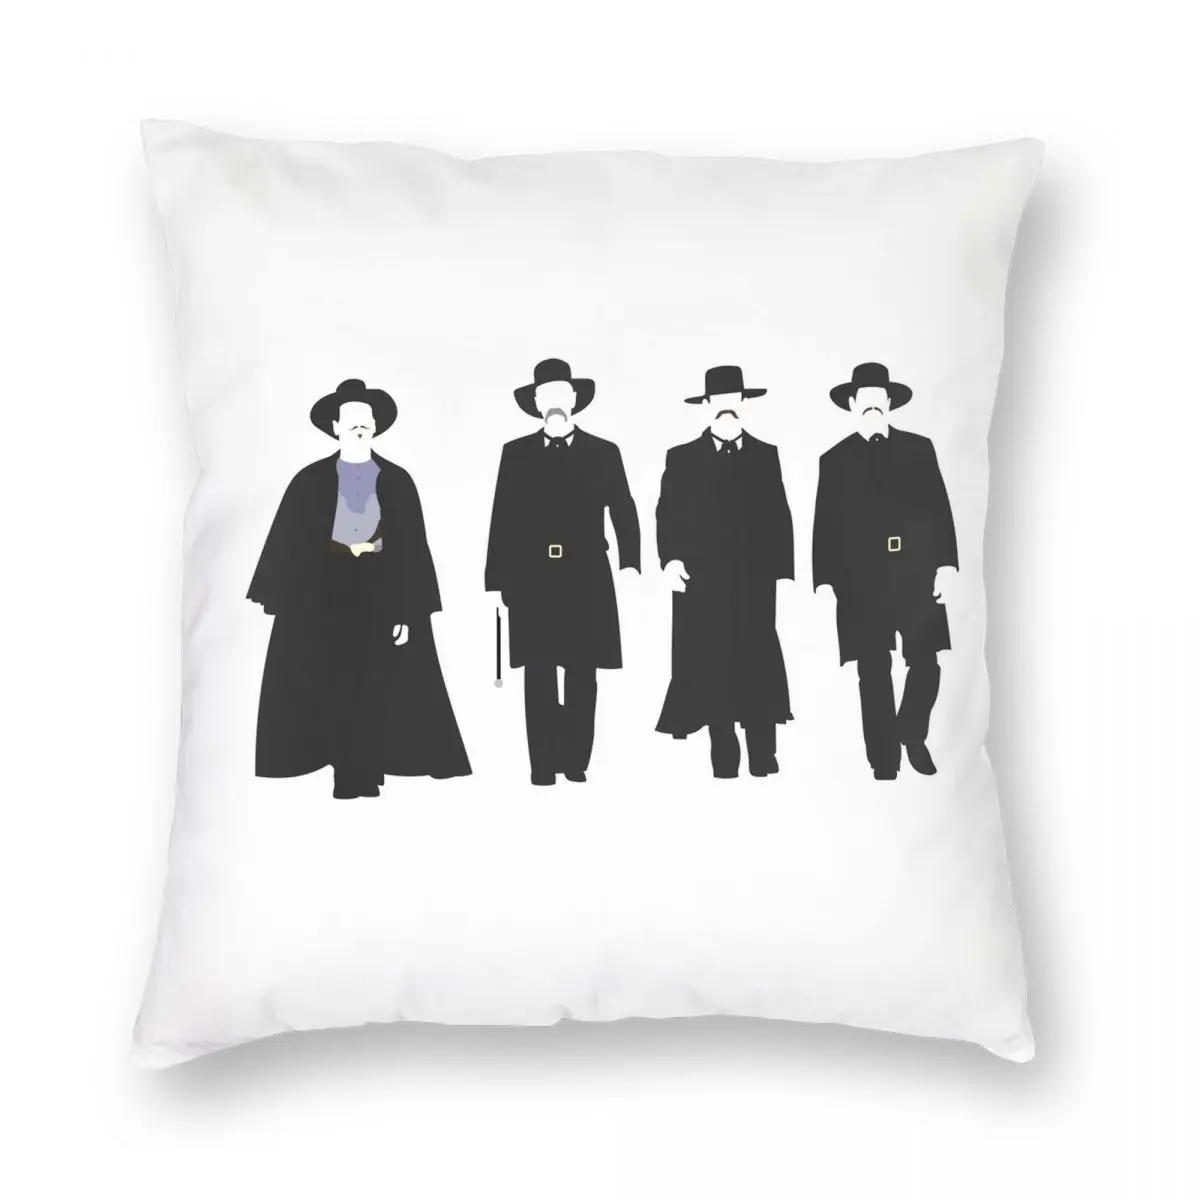 

Tombstone Justice Is Coming Square Pillowcase Polyester Linen Velvet Pattern Zip Decor Throw Pillow Case Sofa Seater Cushion